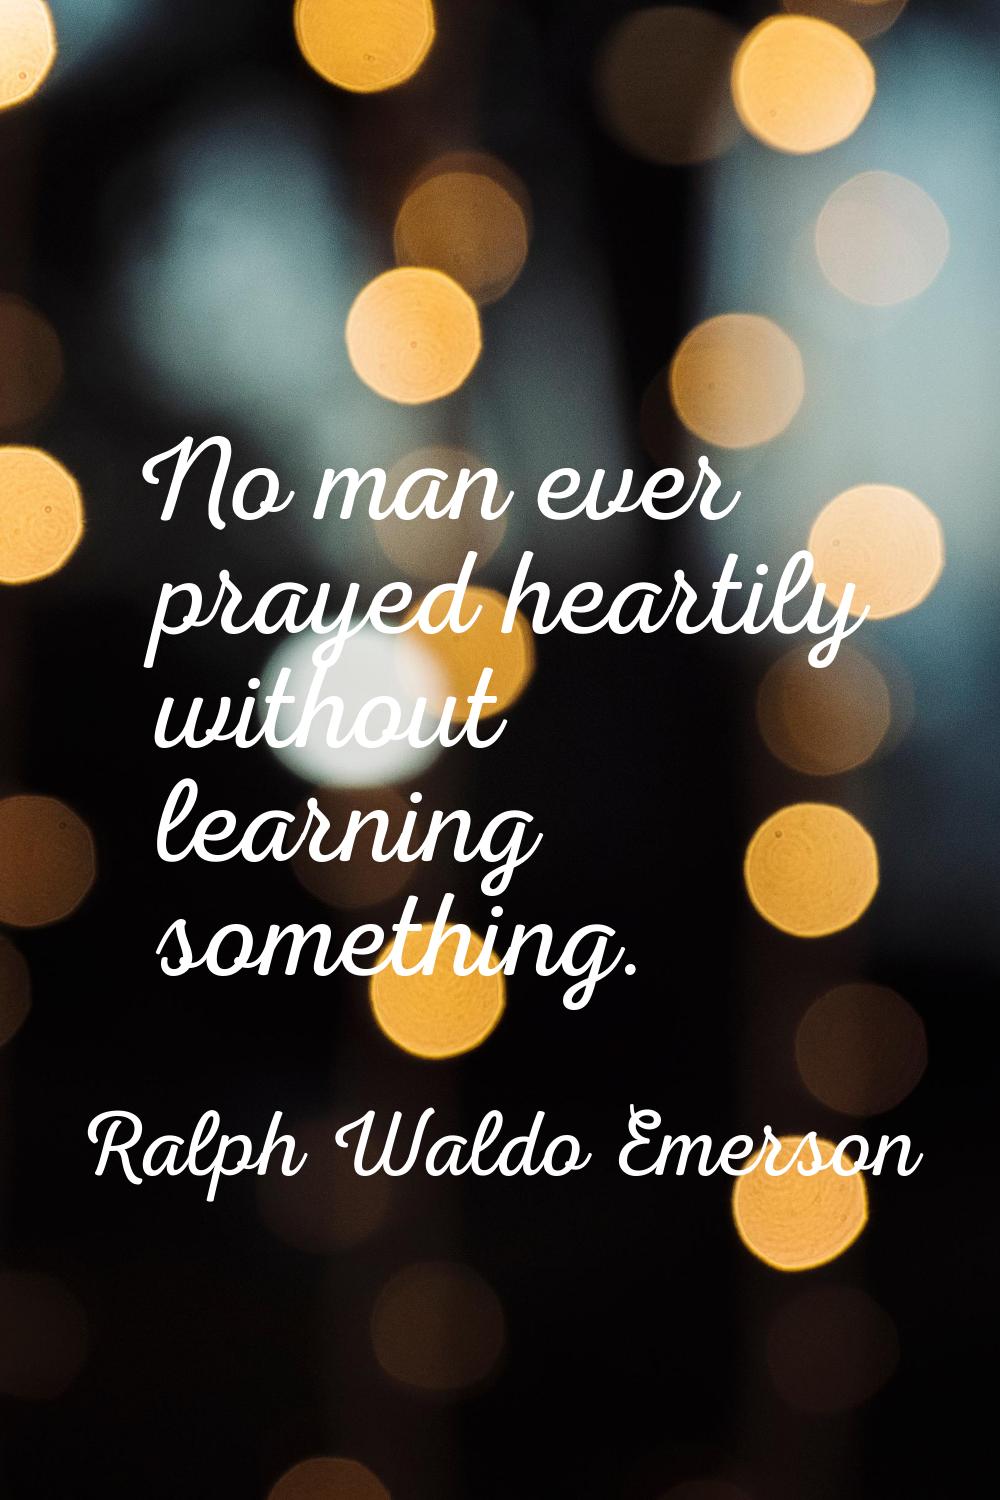 No man ever prayed heartily without learning something.